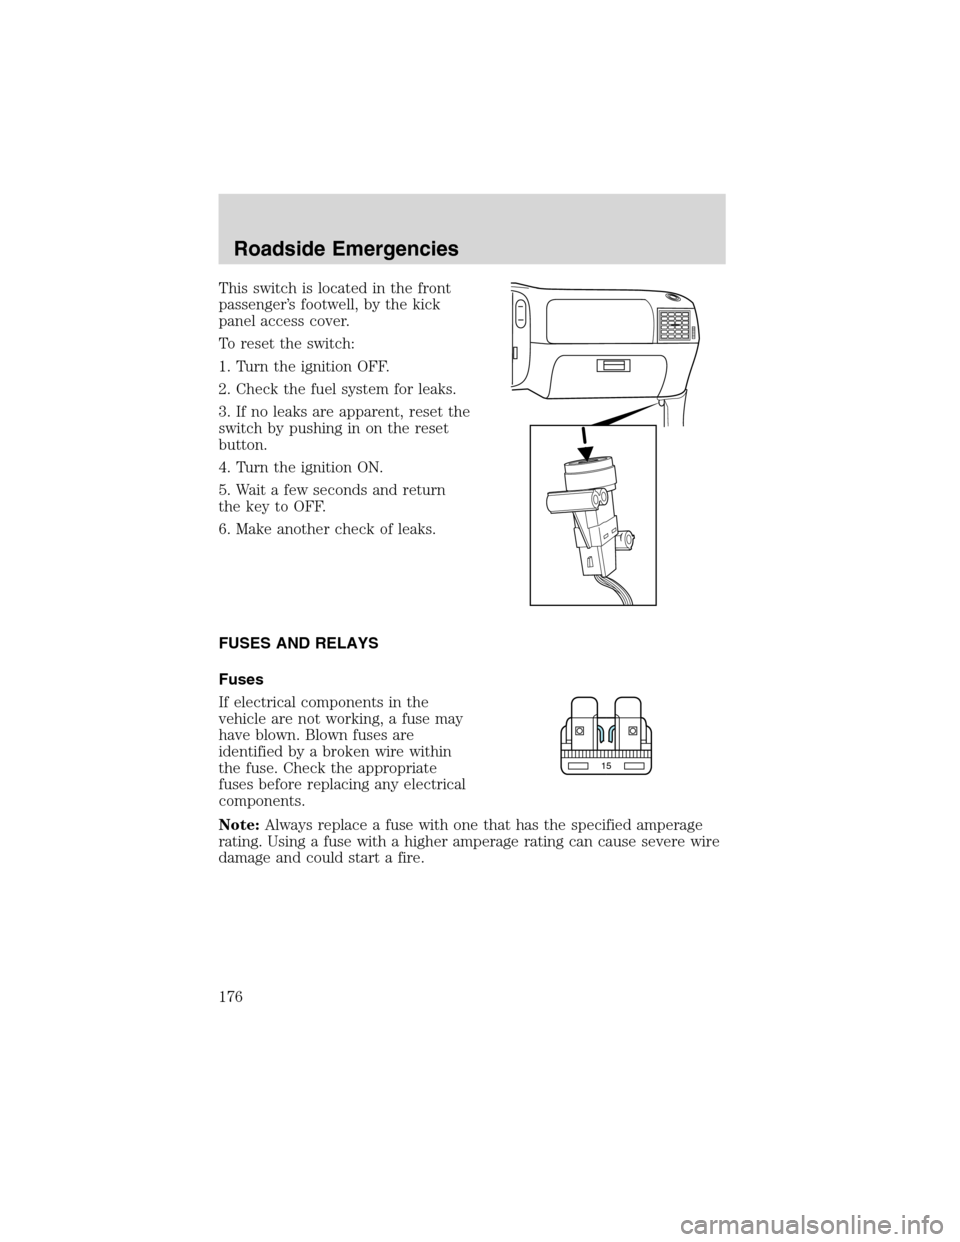 FORD F150 2003 10.G Owners Manual This switch is located in the front
passenger’s footwell, by the kick
panel access cover.
To reset the switch:
1. Turn the ignition OFF.
2. Check the fuel system for leaks.
3. If no leaks are appare